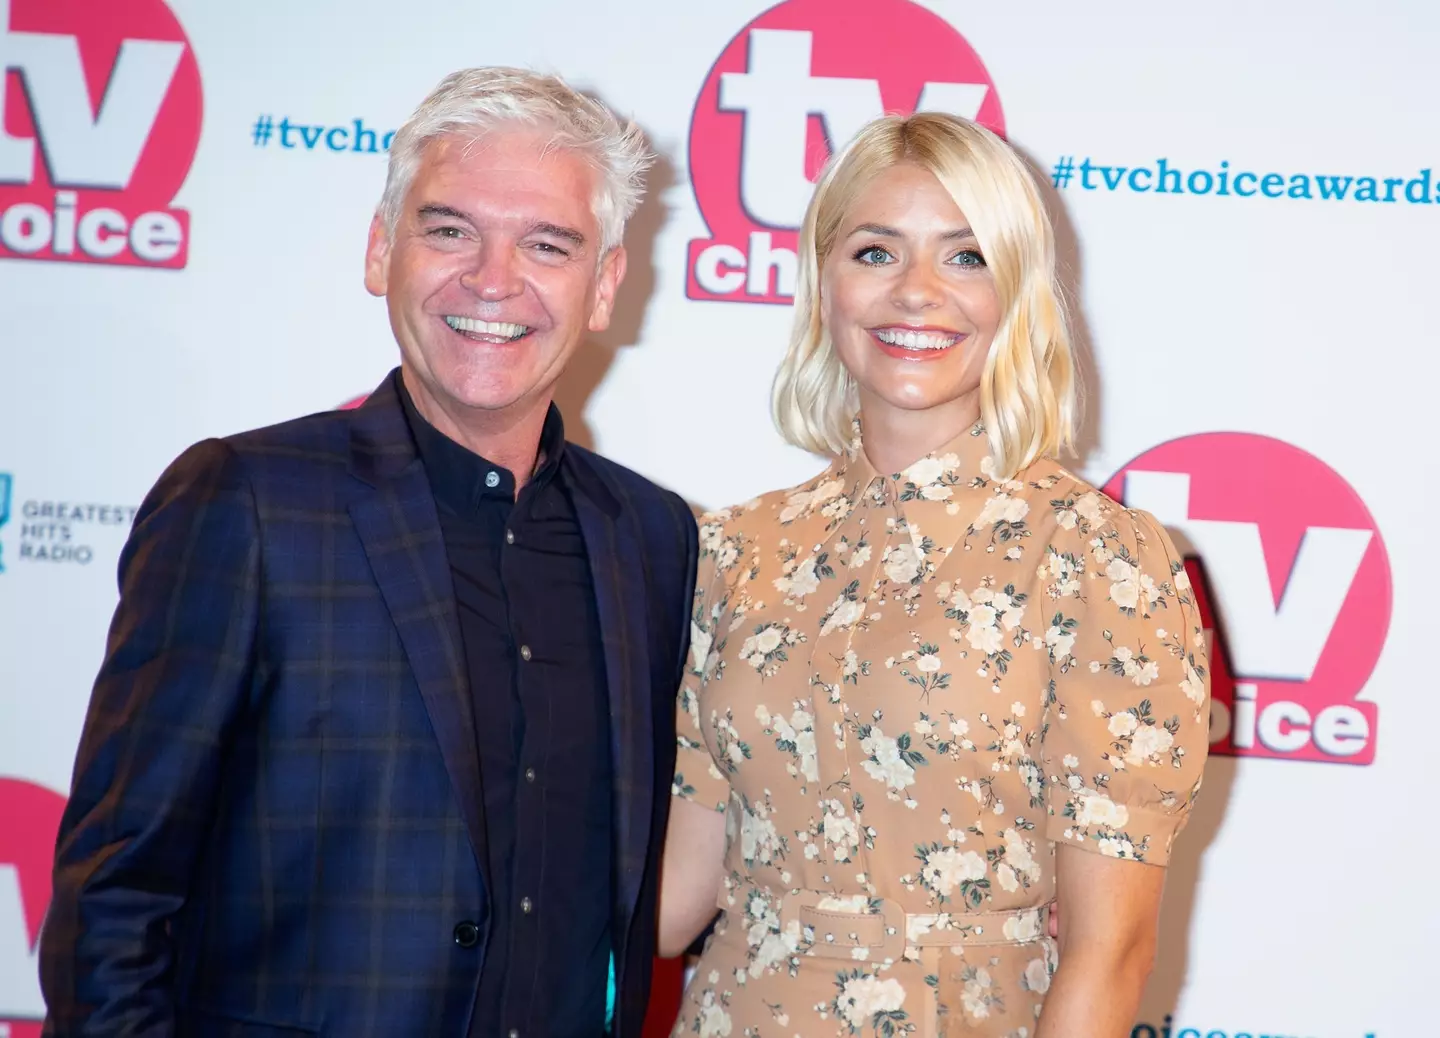 Holly and Phil have presented ITV's This Morning together since 2009.